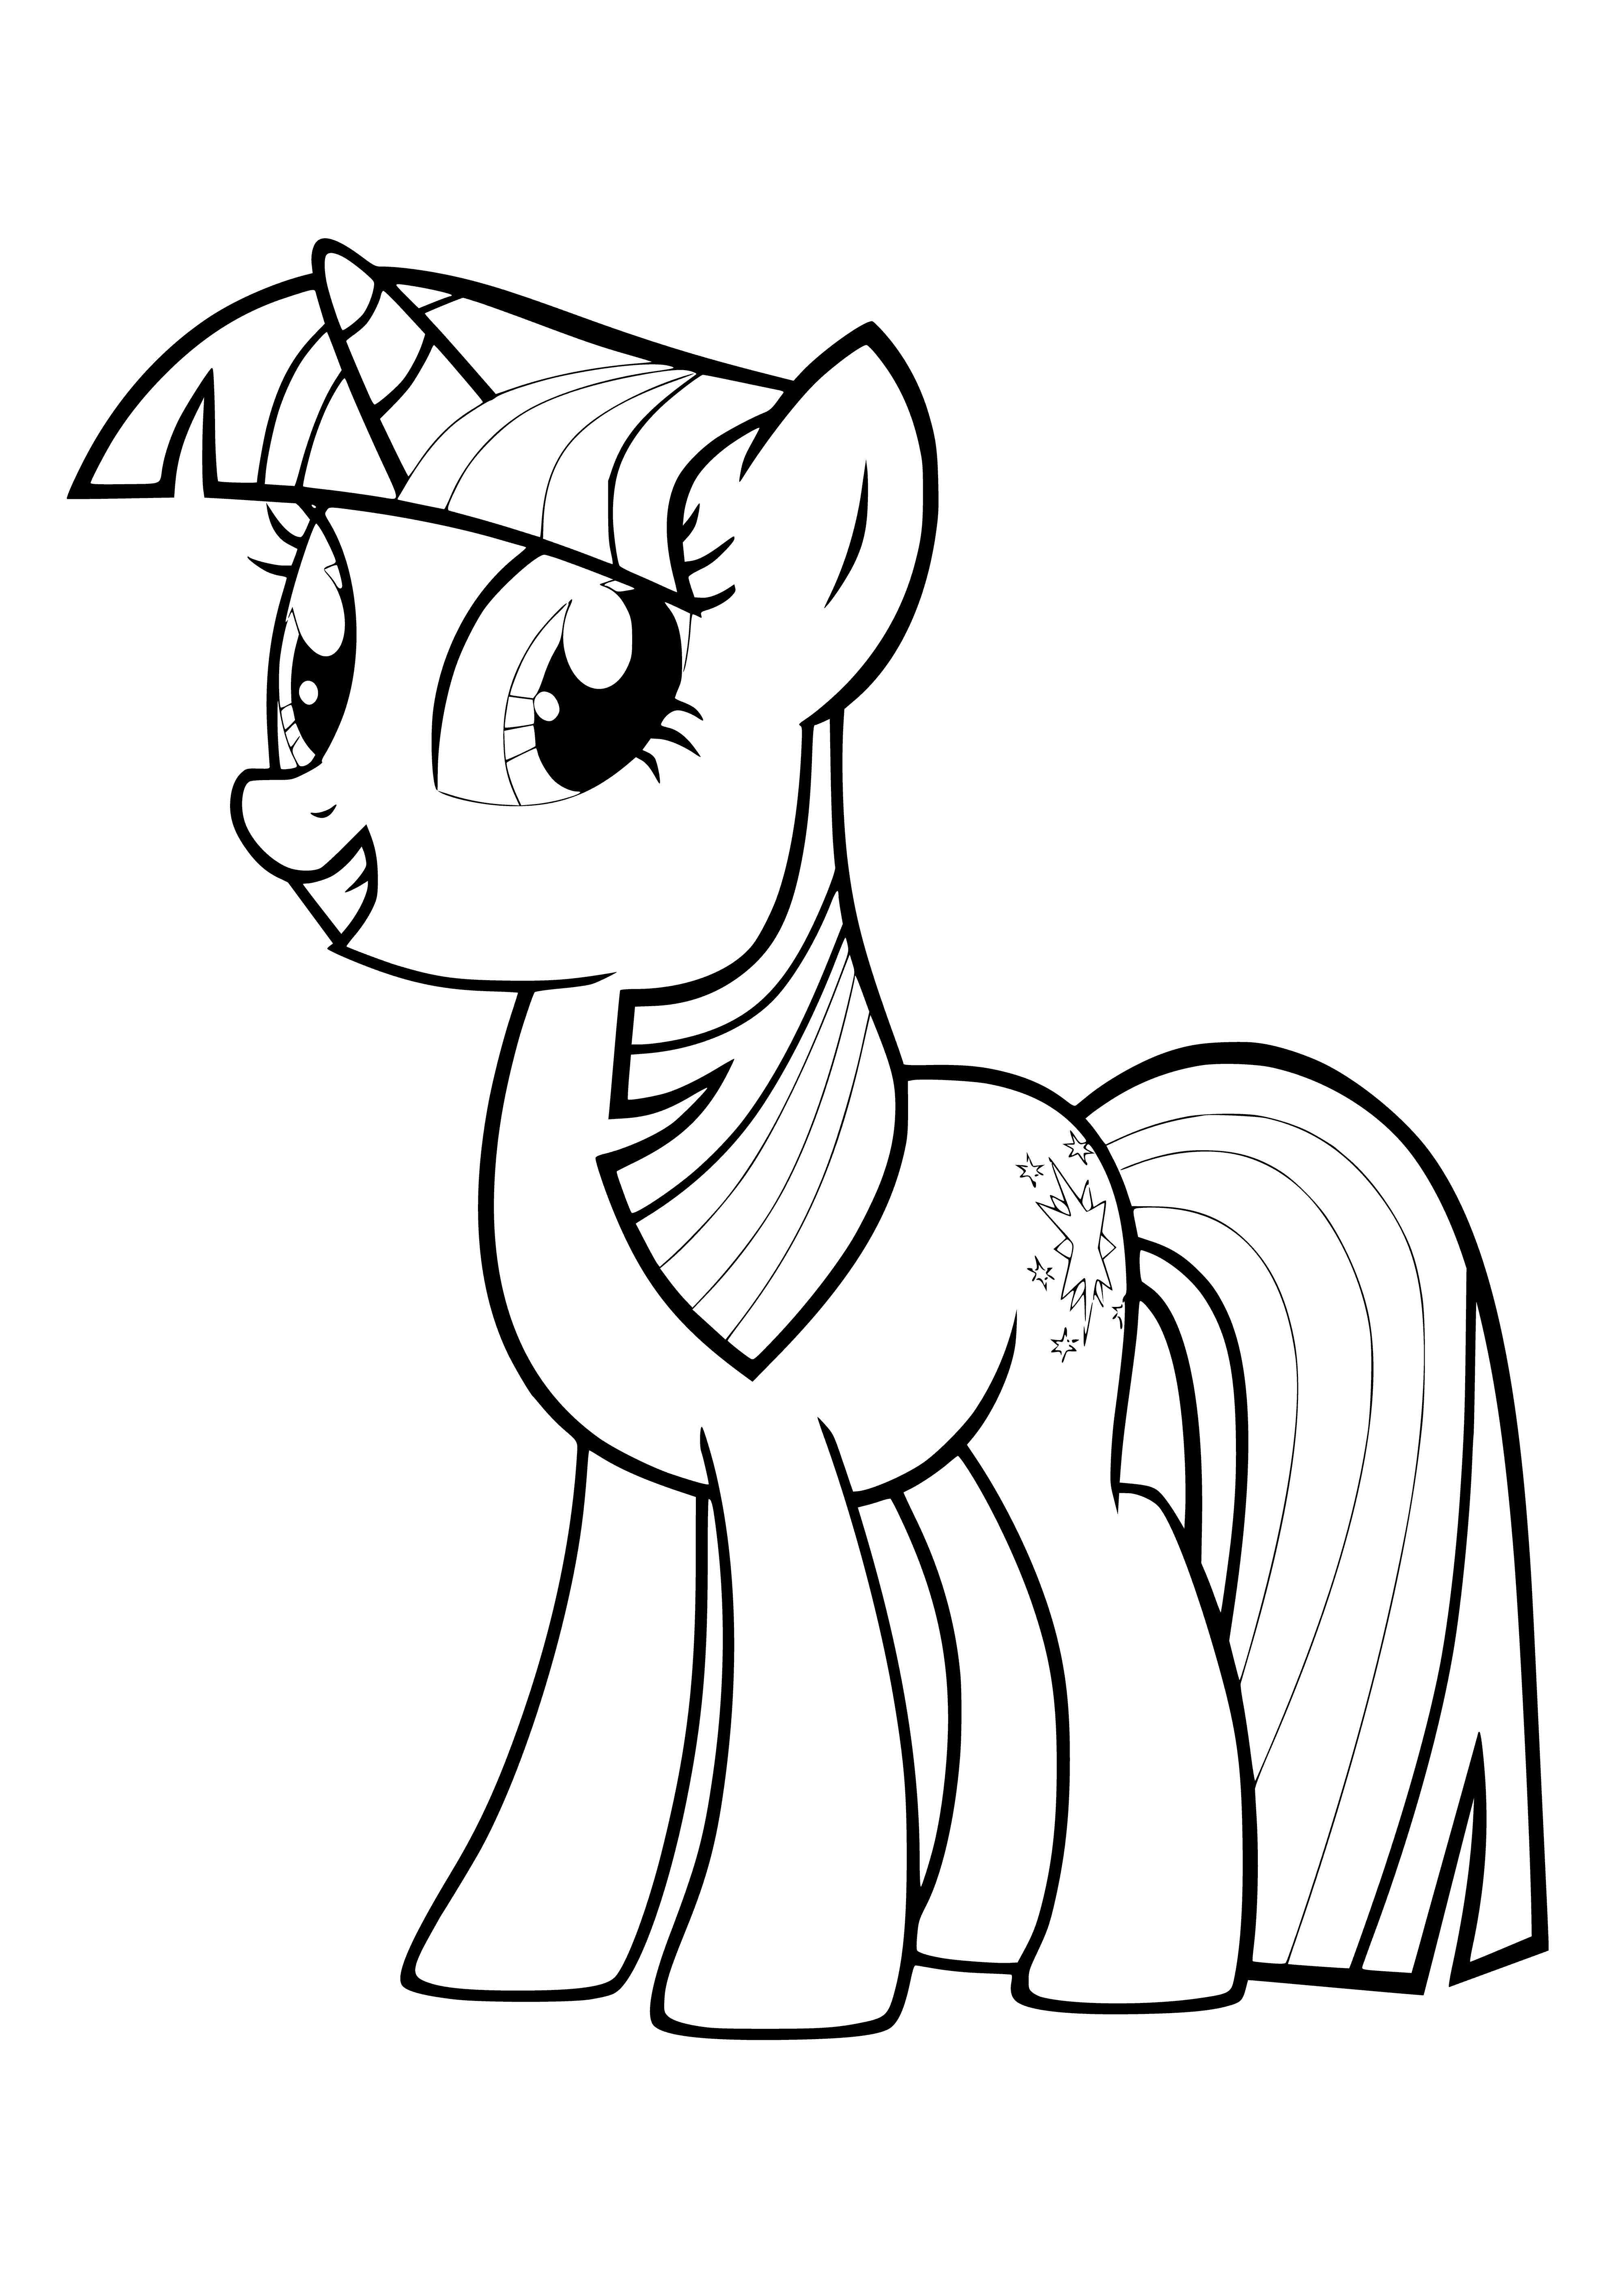 coloring page: Twilight Sparkle is a purple horse with a gem on the forehead, a pink & purple saddle & bridle, & long mane and tail.